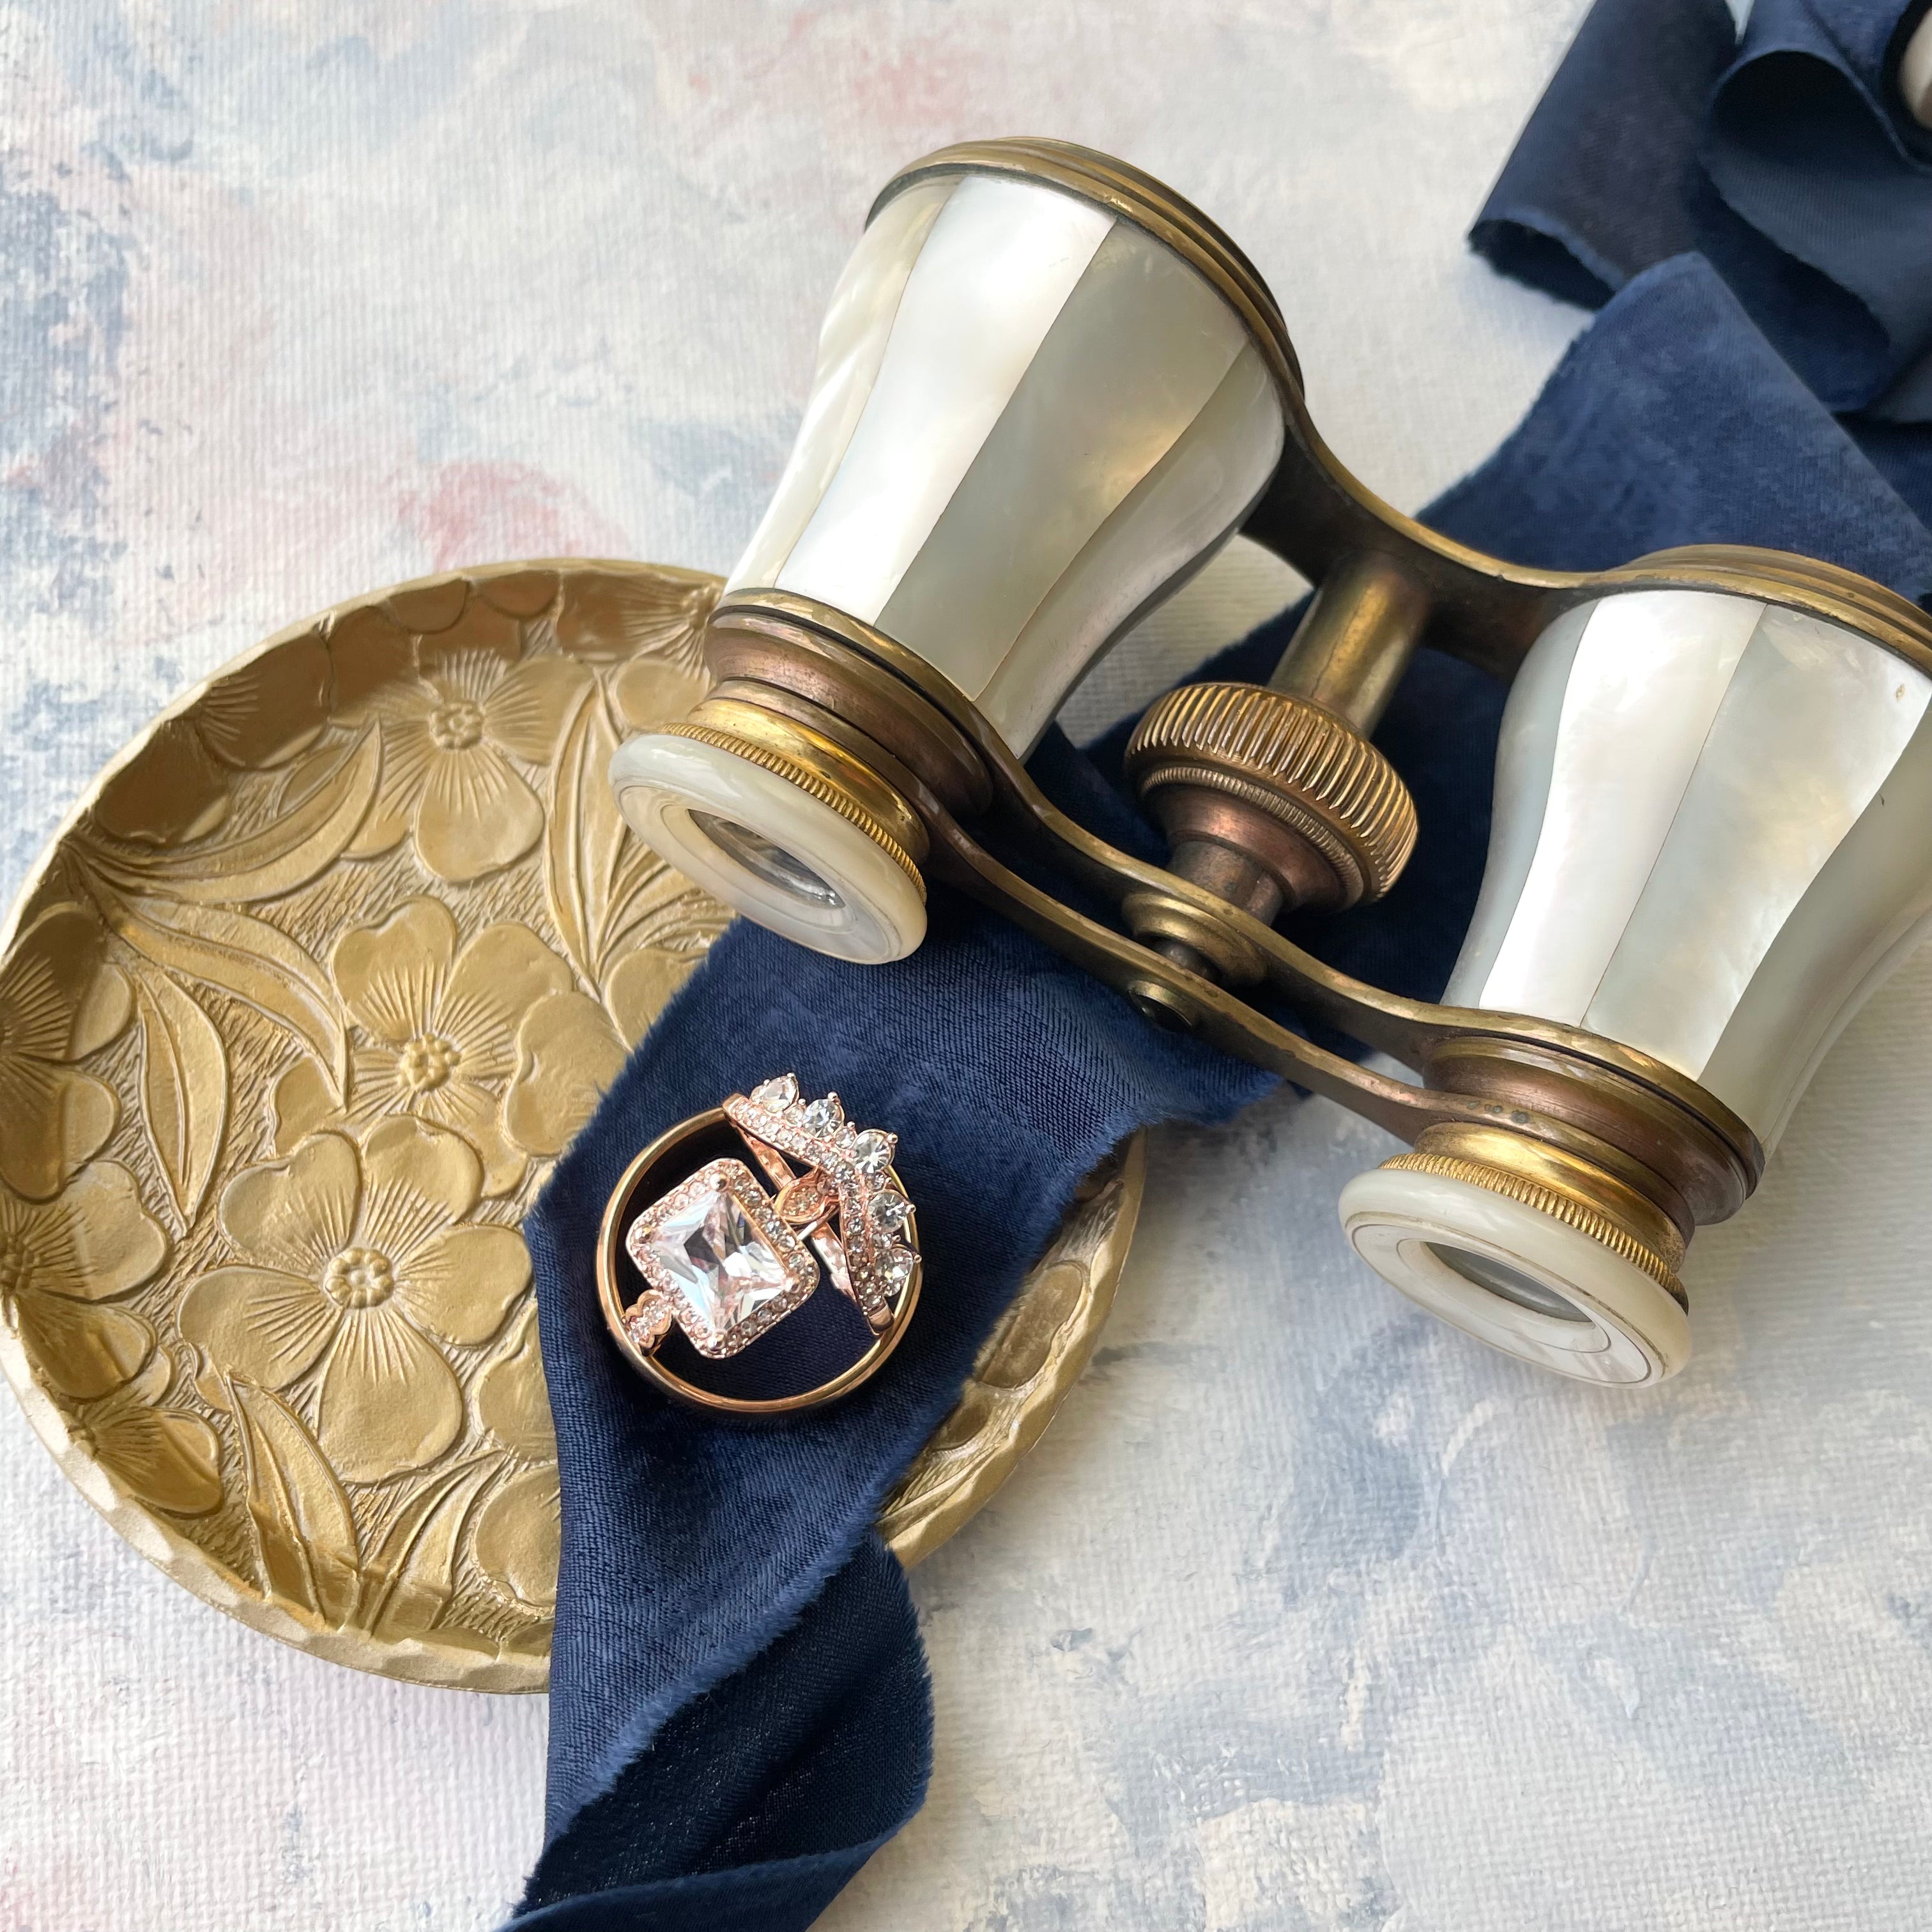 Painted Gold DOGWOOD Dish, ornate gold tray, styled with navy blue ribbon and vintage opera glasses  - wedding flat lay props from Champagne & GRIT